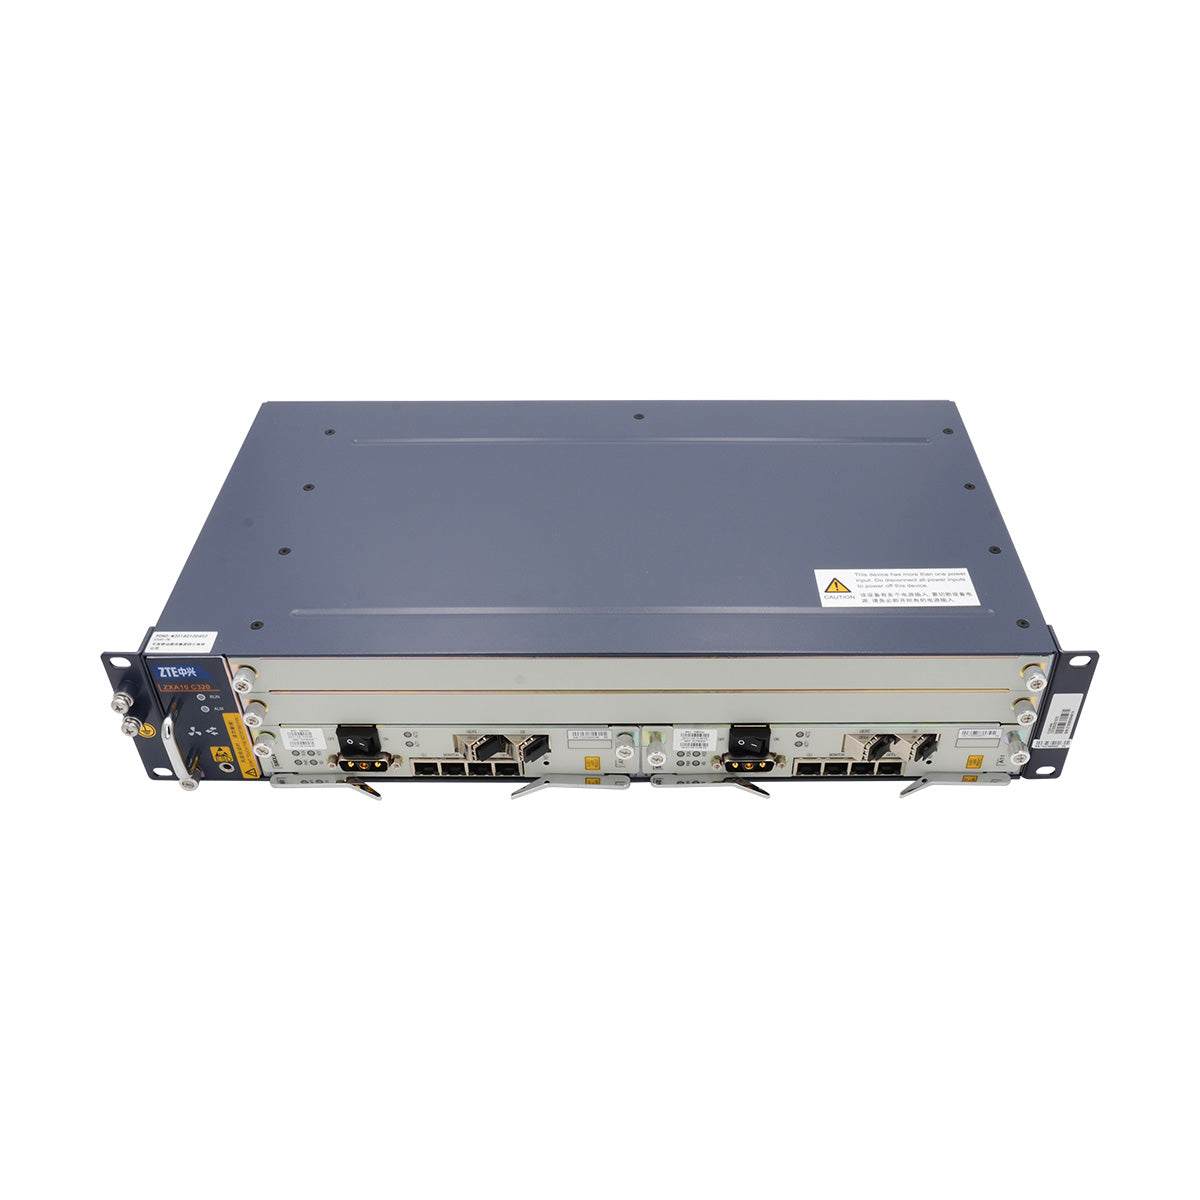 ZXA10 C320 OLT 19inch Chassis